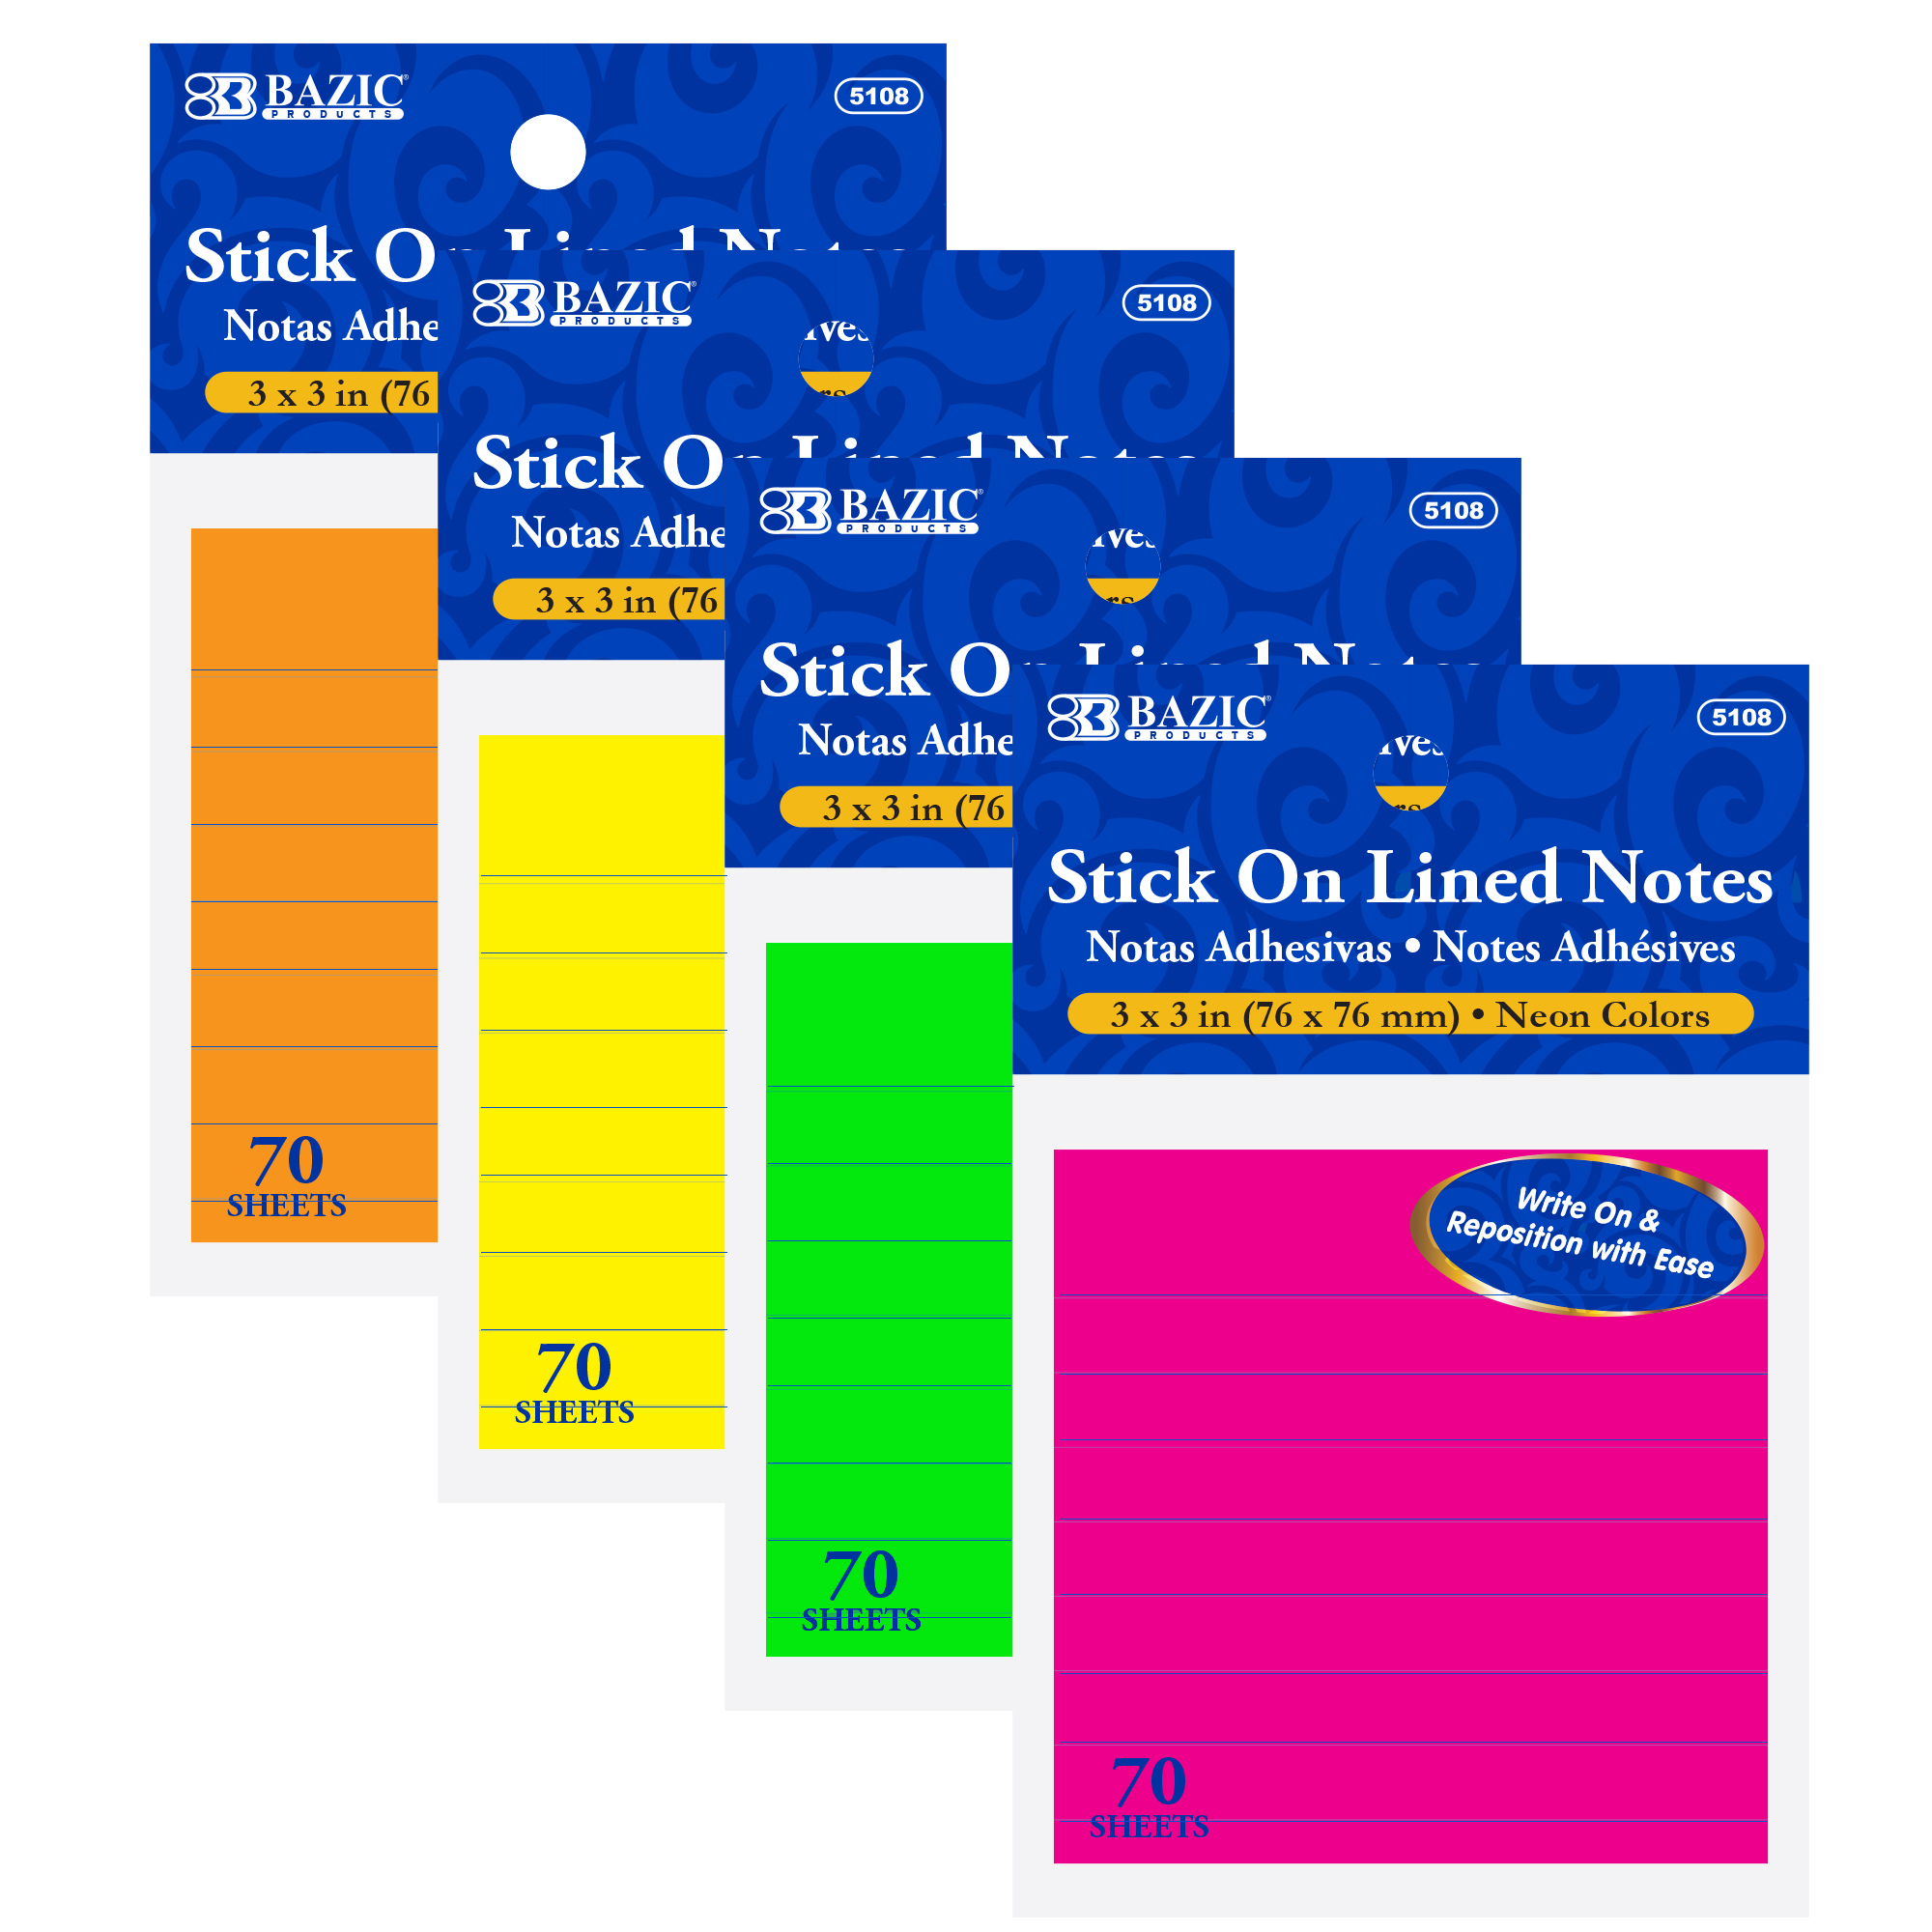 Bazic Products 5105 100 Ct. 3 x 3 Stick on Note - Pack of 24